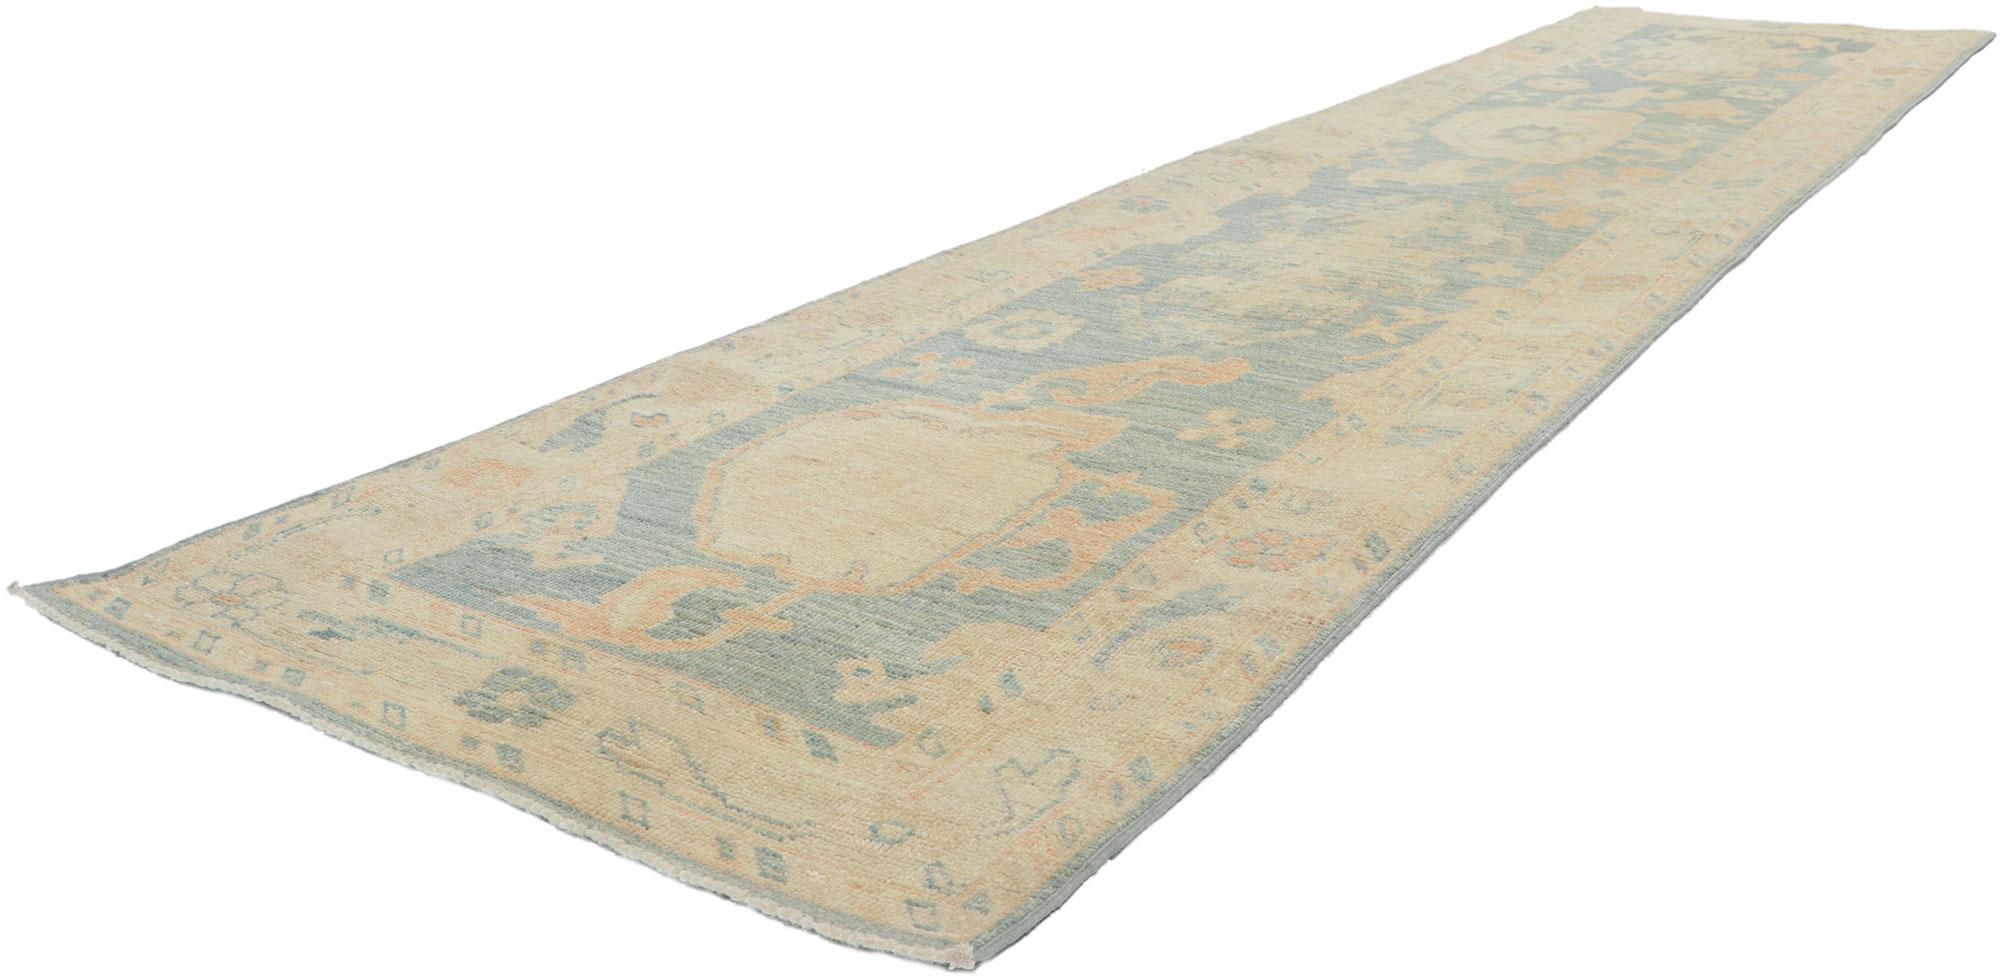 80842 Contemporary Oushak Runner, 02'08 x 11'10. Polished and playful, this hand-knotted wool contemporary Contemporary Oushak runner beautifully embodies a modern style. With elements of comfort, modern style and functional versatility, this Oushak